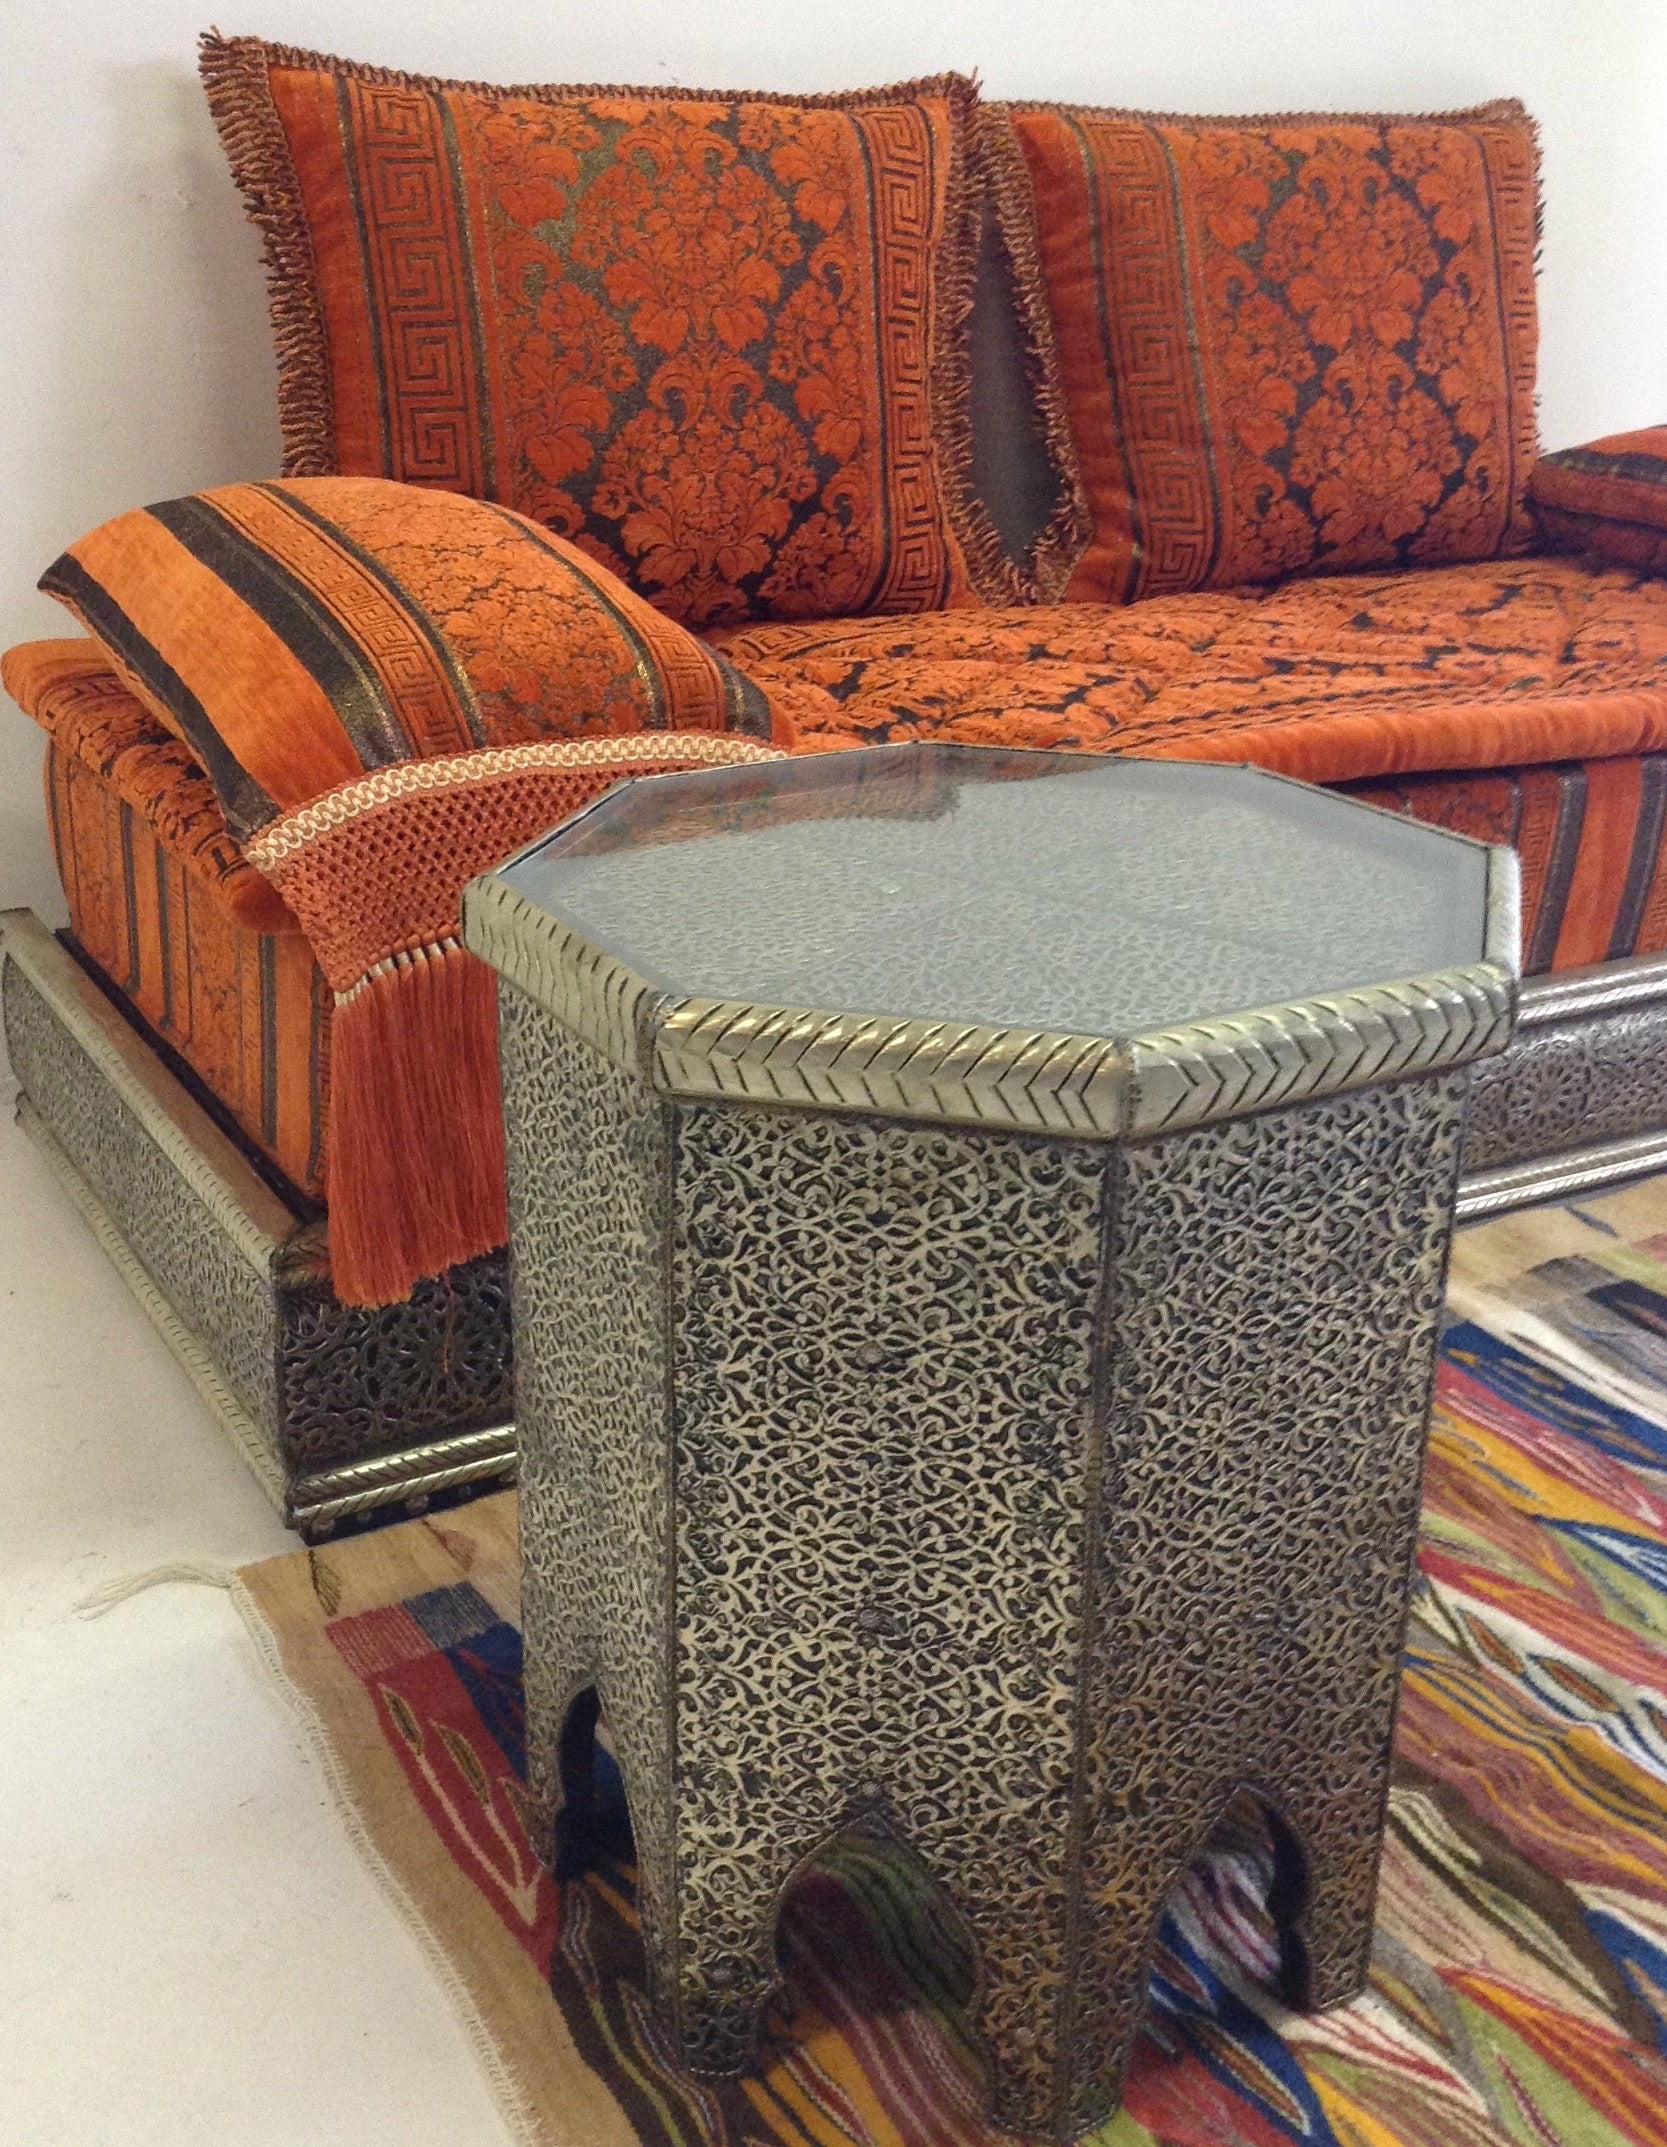 Moroccan living theme at casbah decor